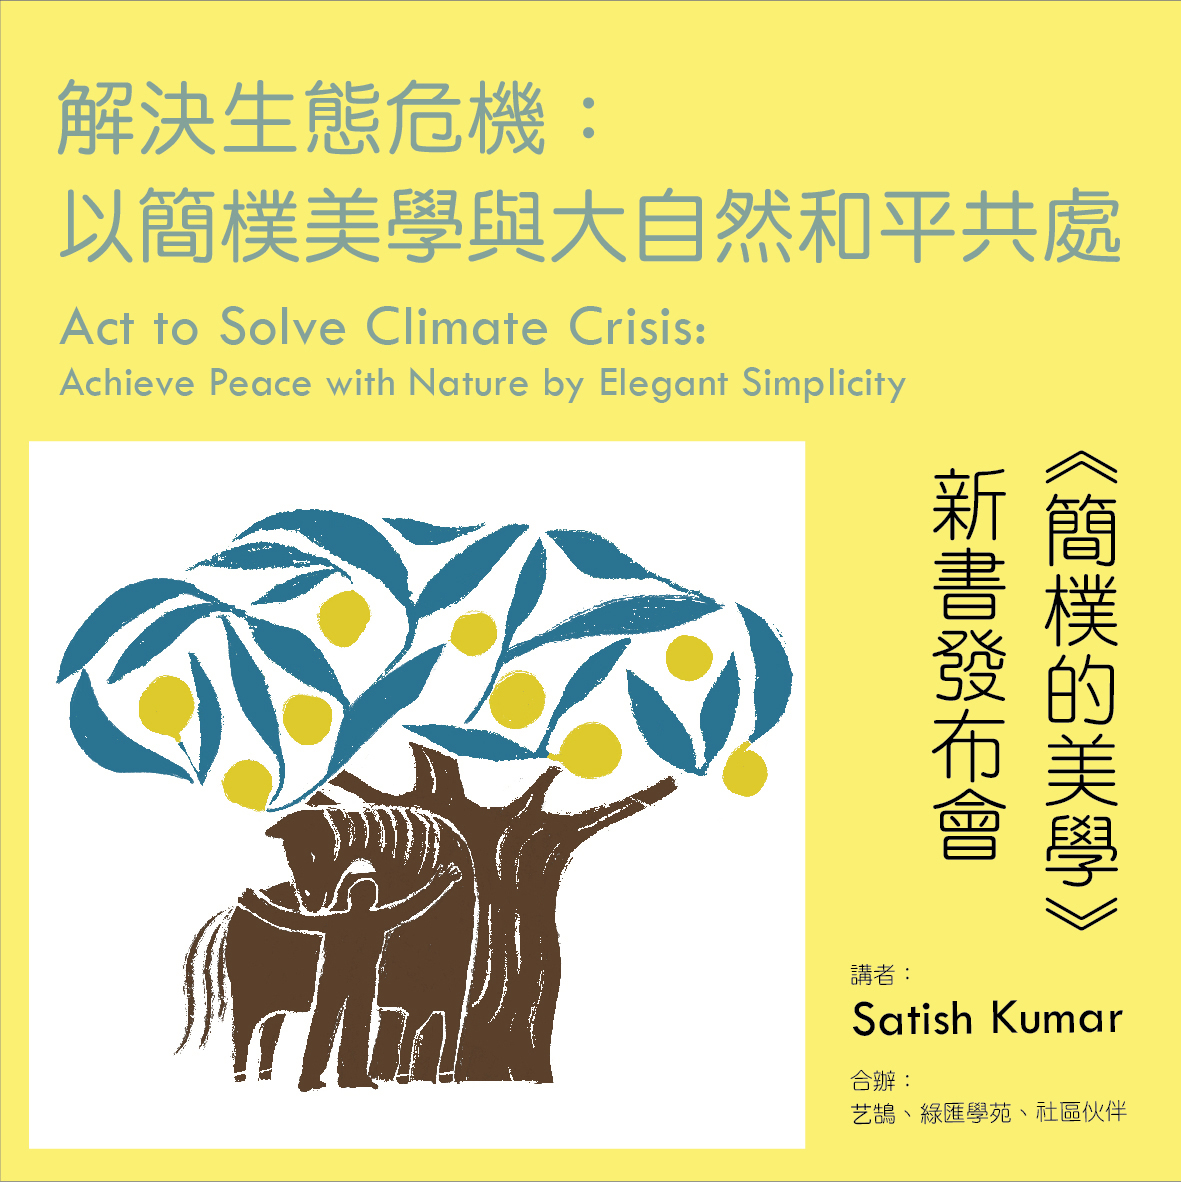 Act to Solve Climate Crisis: Achieve Peace with Nature by Elegant SimplicityMeet Satish Kumar, the Author of Elegant Simplicity